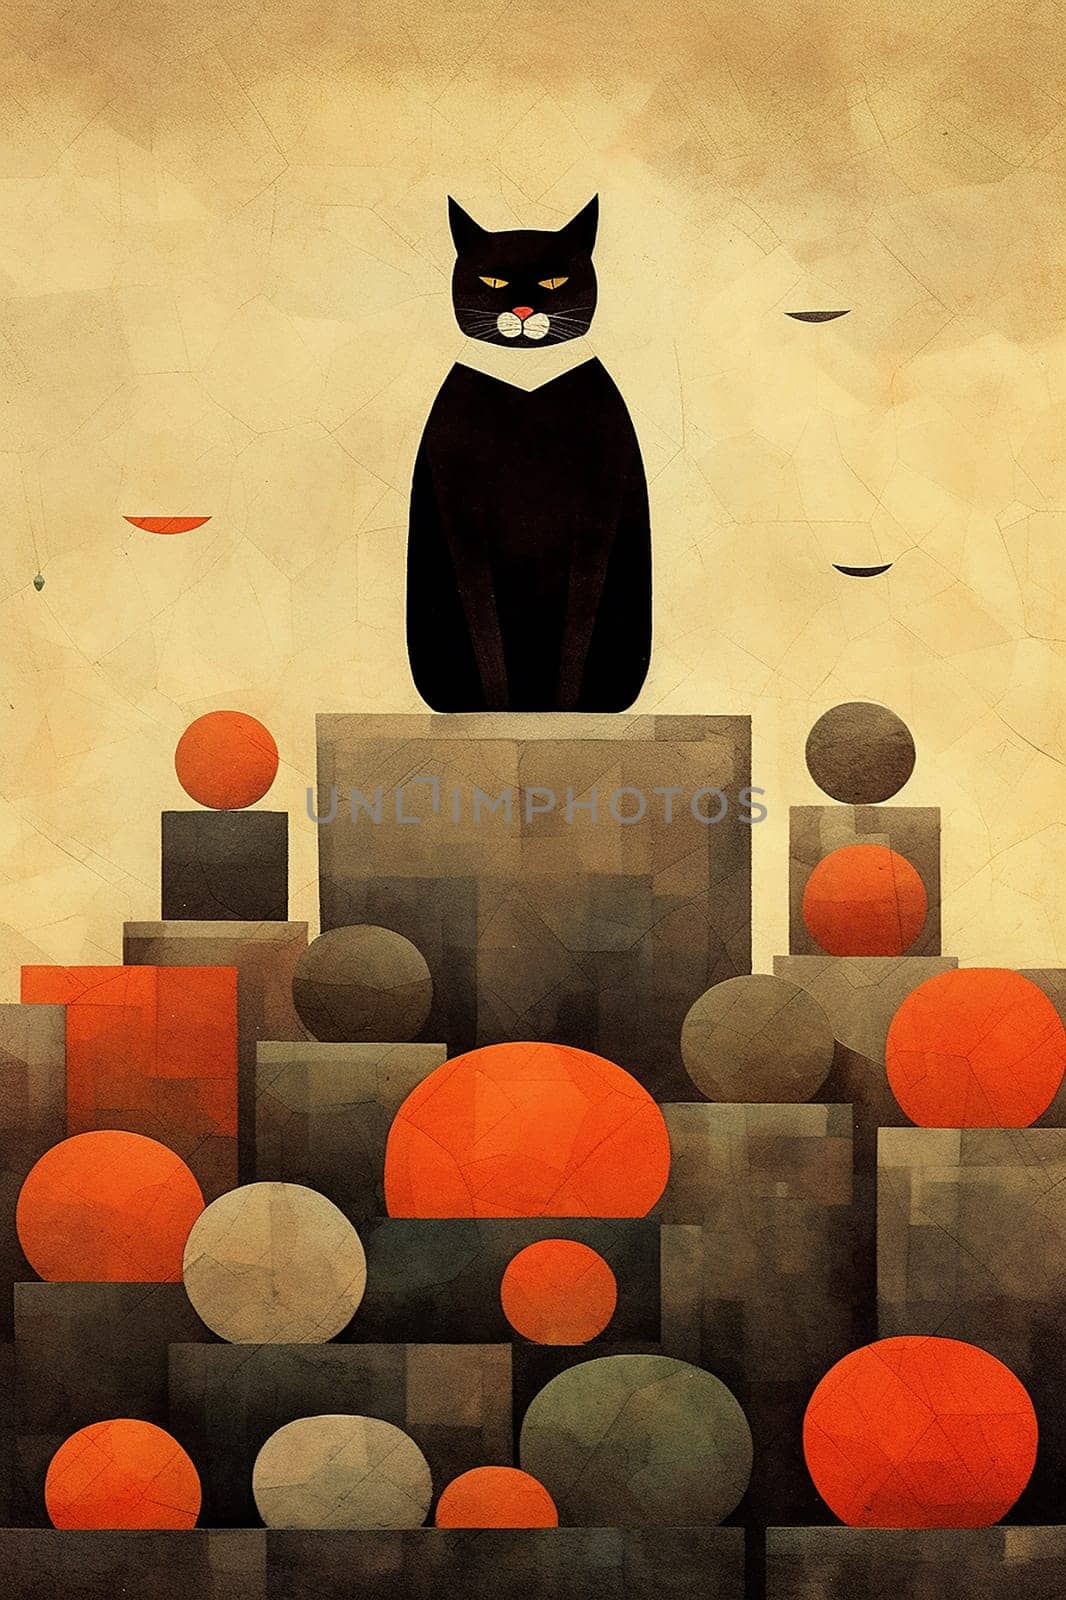 Stylized illustration of a black cat sitting atop an abstract geometric shape arrangement. by Hype2art